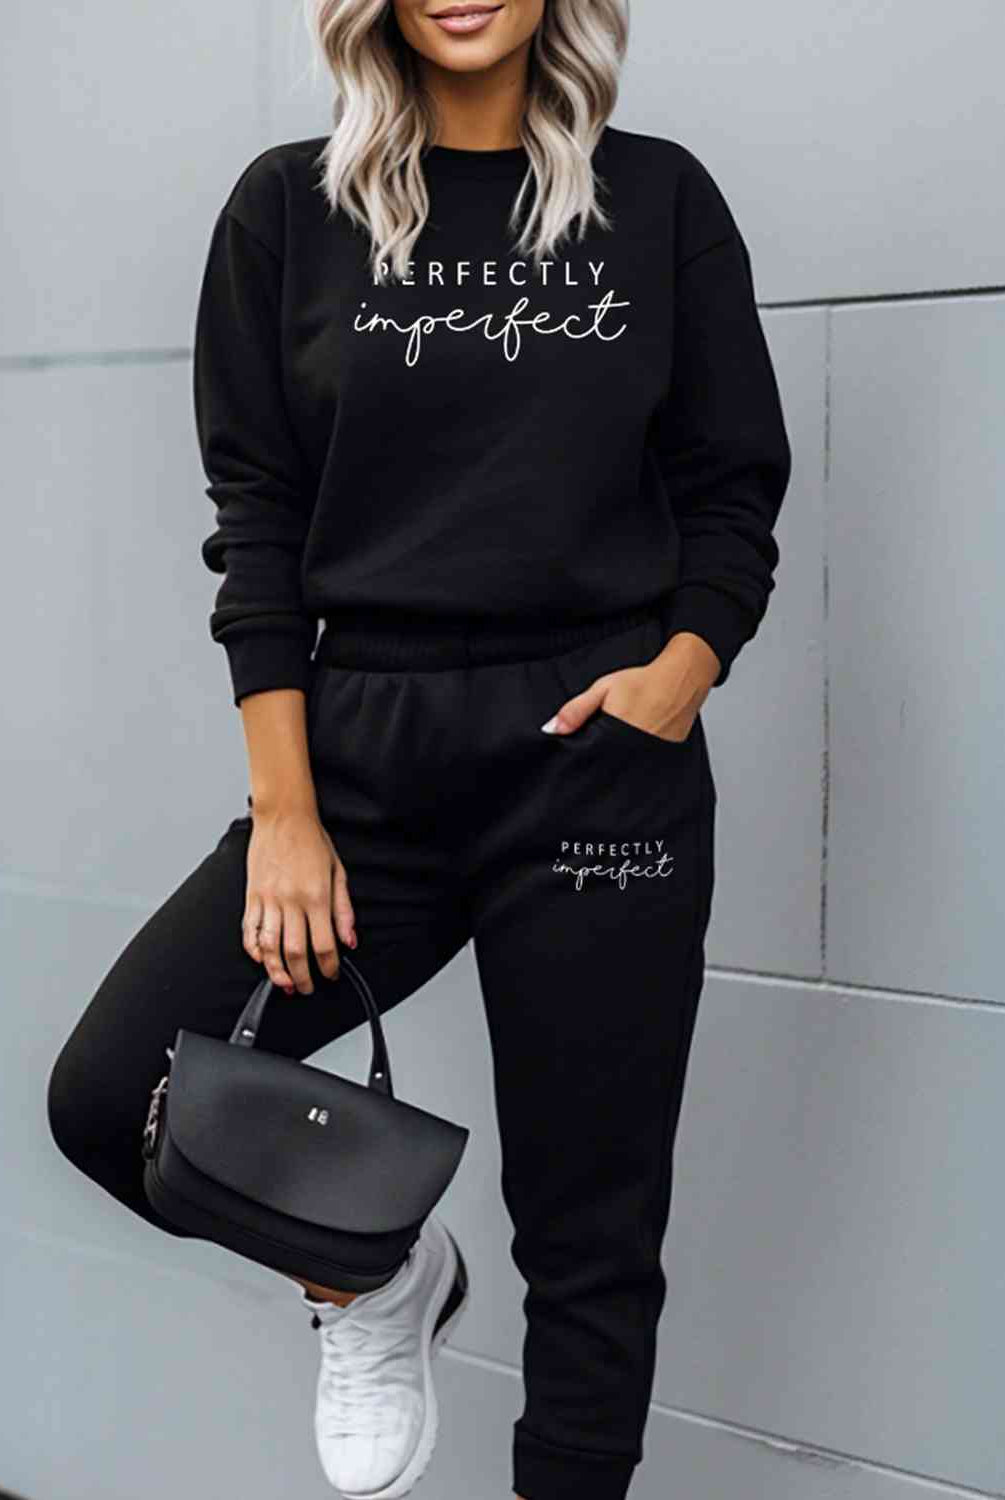 PERFECTLY IMPERFECT Graphic Sweatshirt and Sweatpants Set - GemThreads Boutique